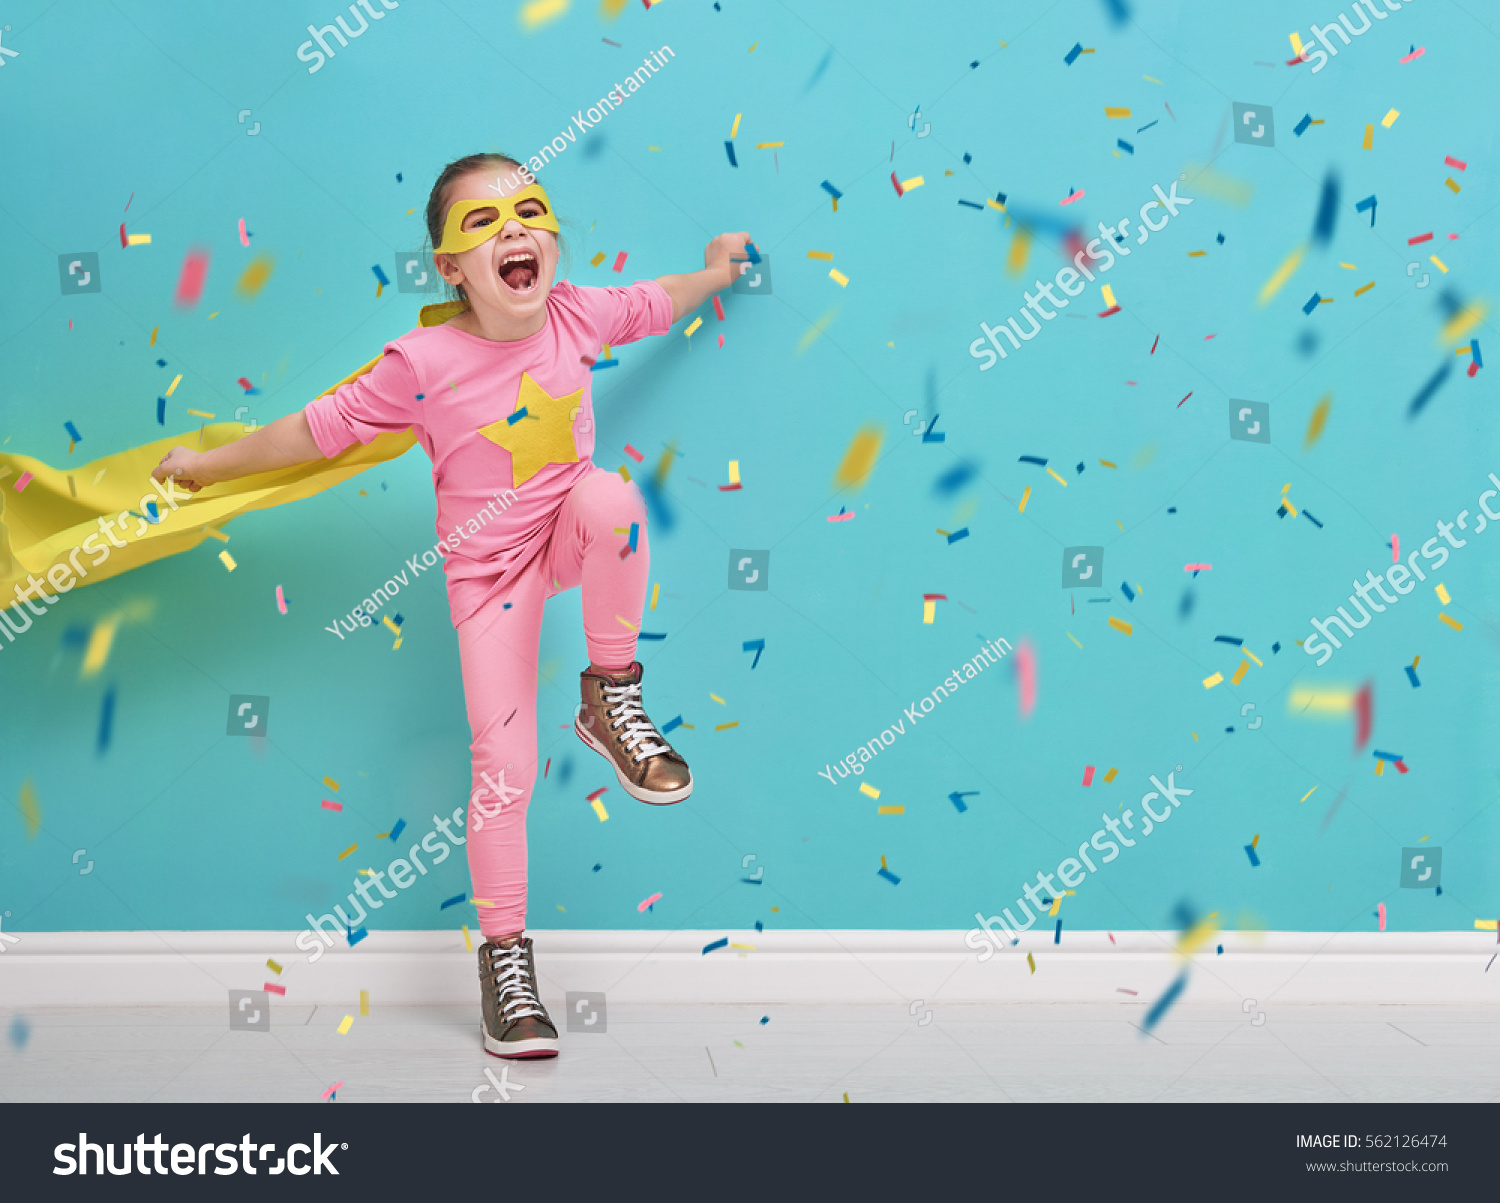 Little child plays superhero. Kid on the background of bright blue wall. Girl is throwing confetti and jumping. Yellow, pink and  turquoise colors.